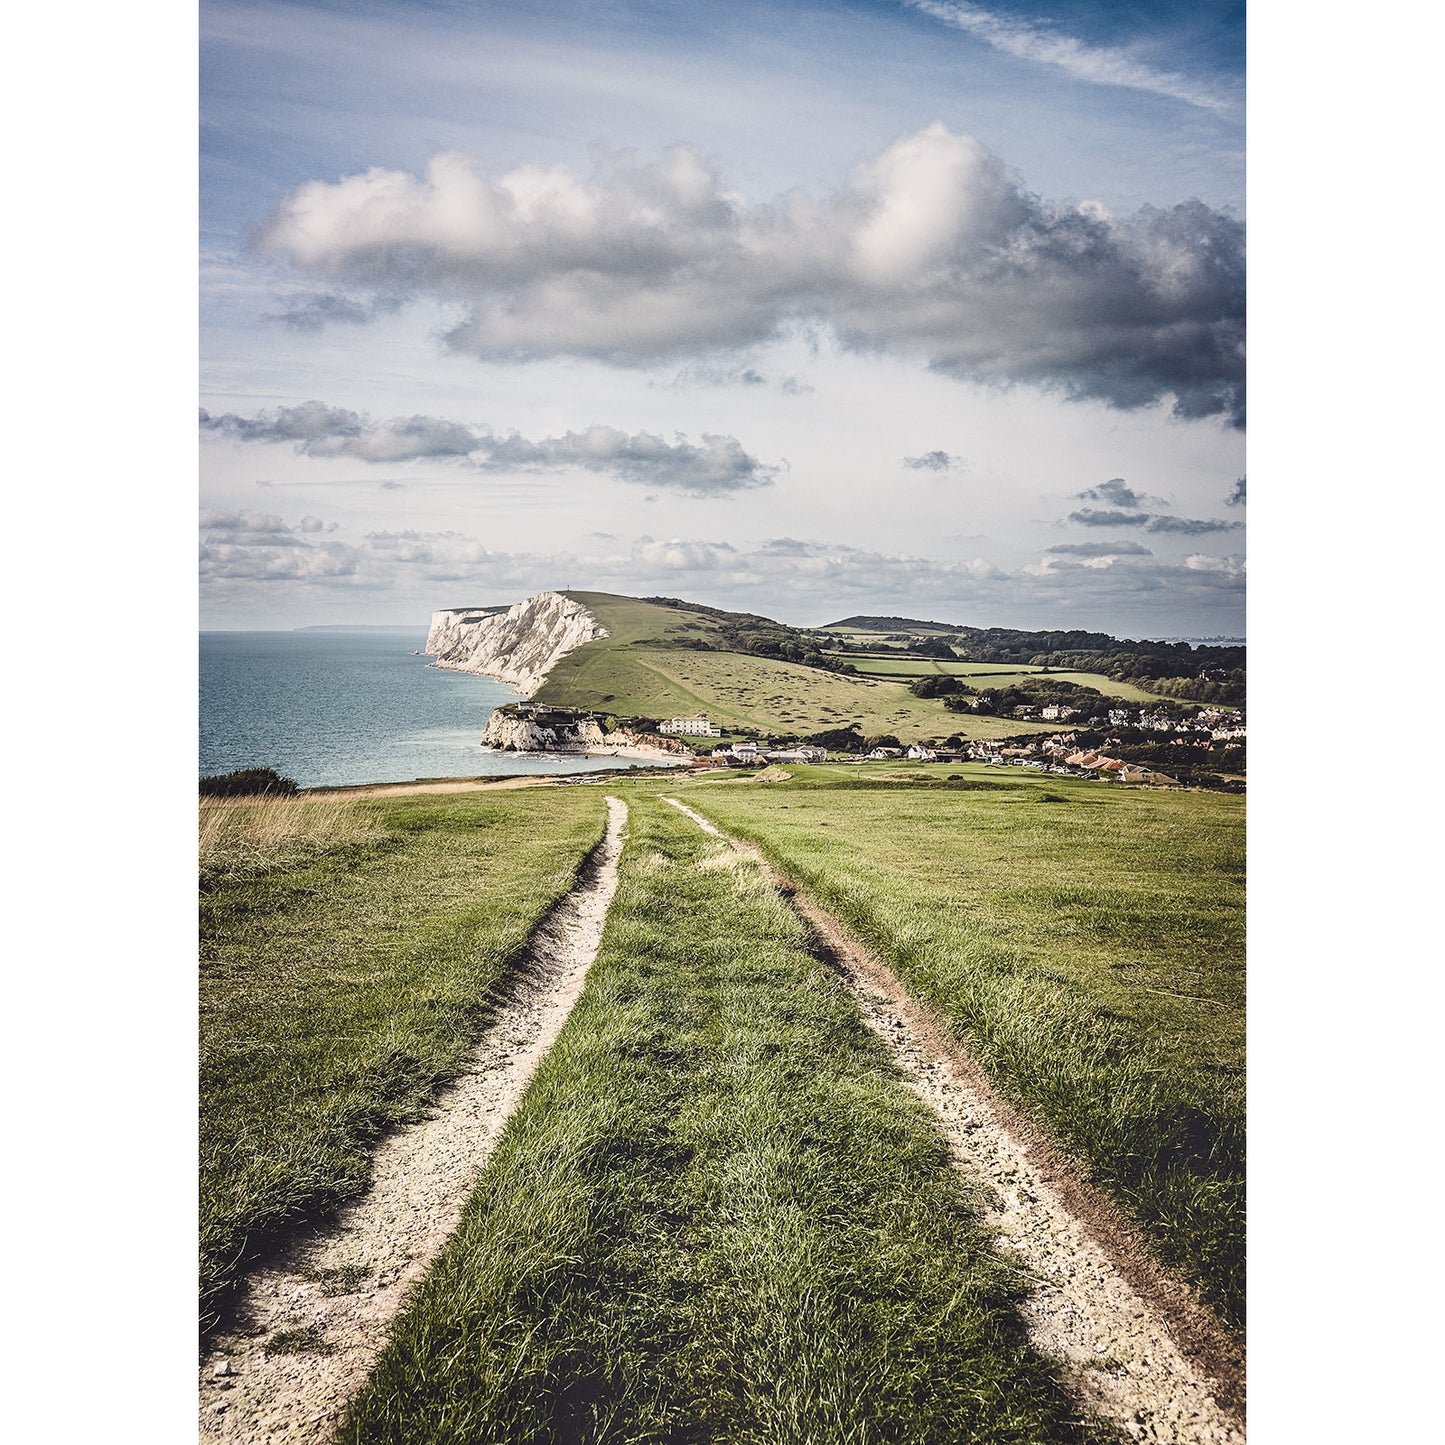 A scenic view of a countryside trail leading towards cliffs by the Isle of Wight captured by Tennyson Down from Available Light Photography.